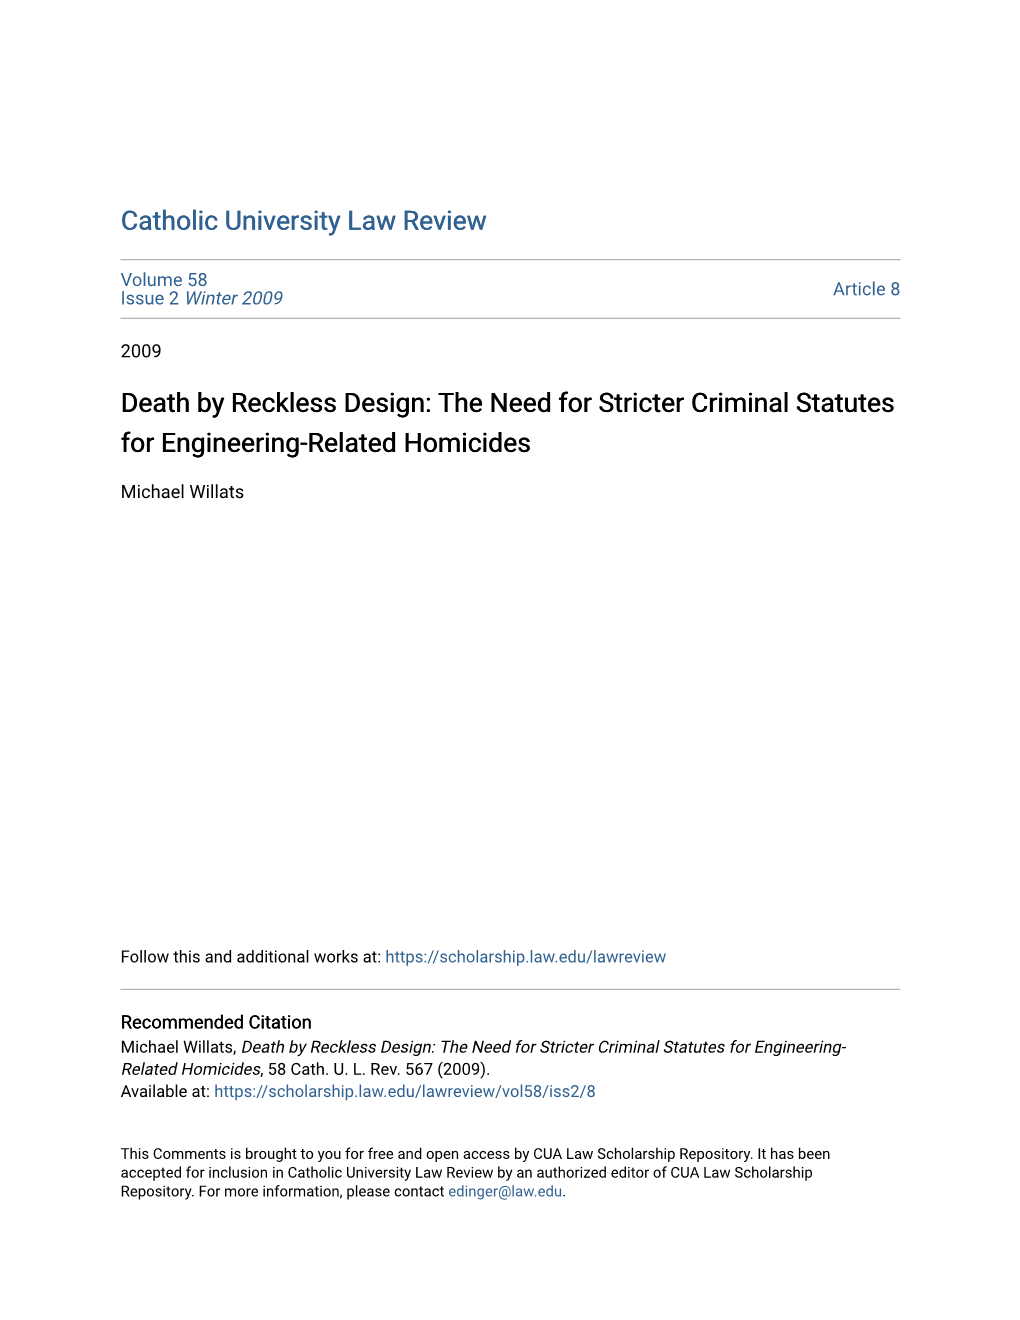 Death by Reckless Design: the Need for Stricter Criminal Statutes for Engineering-Related Homicides